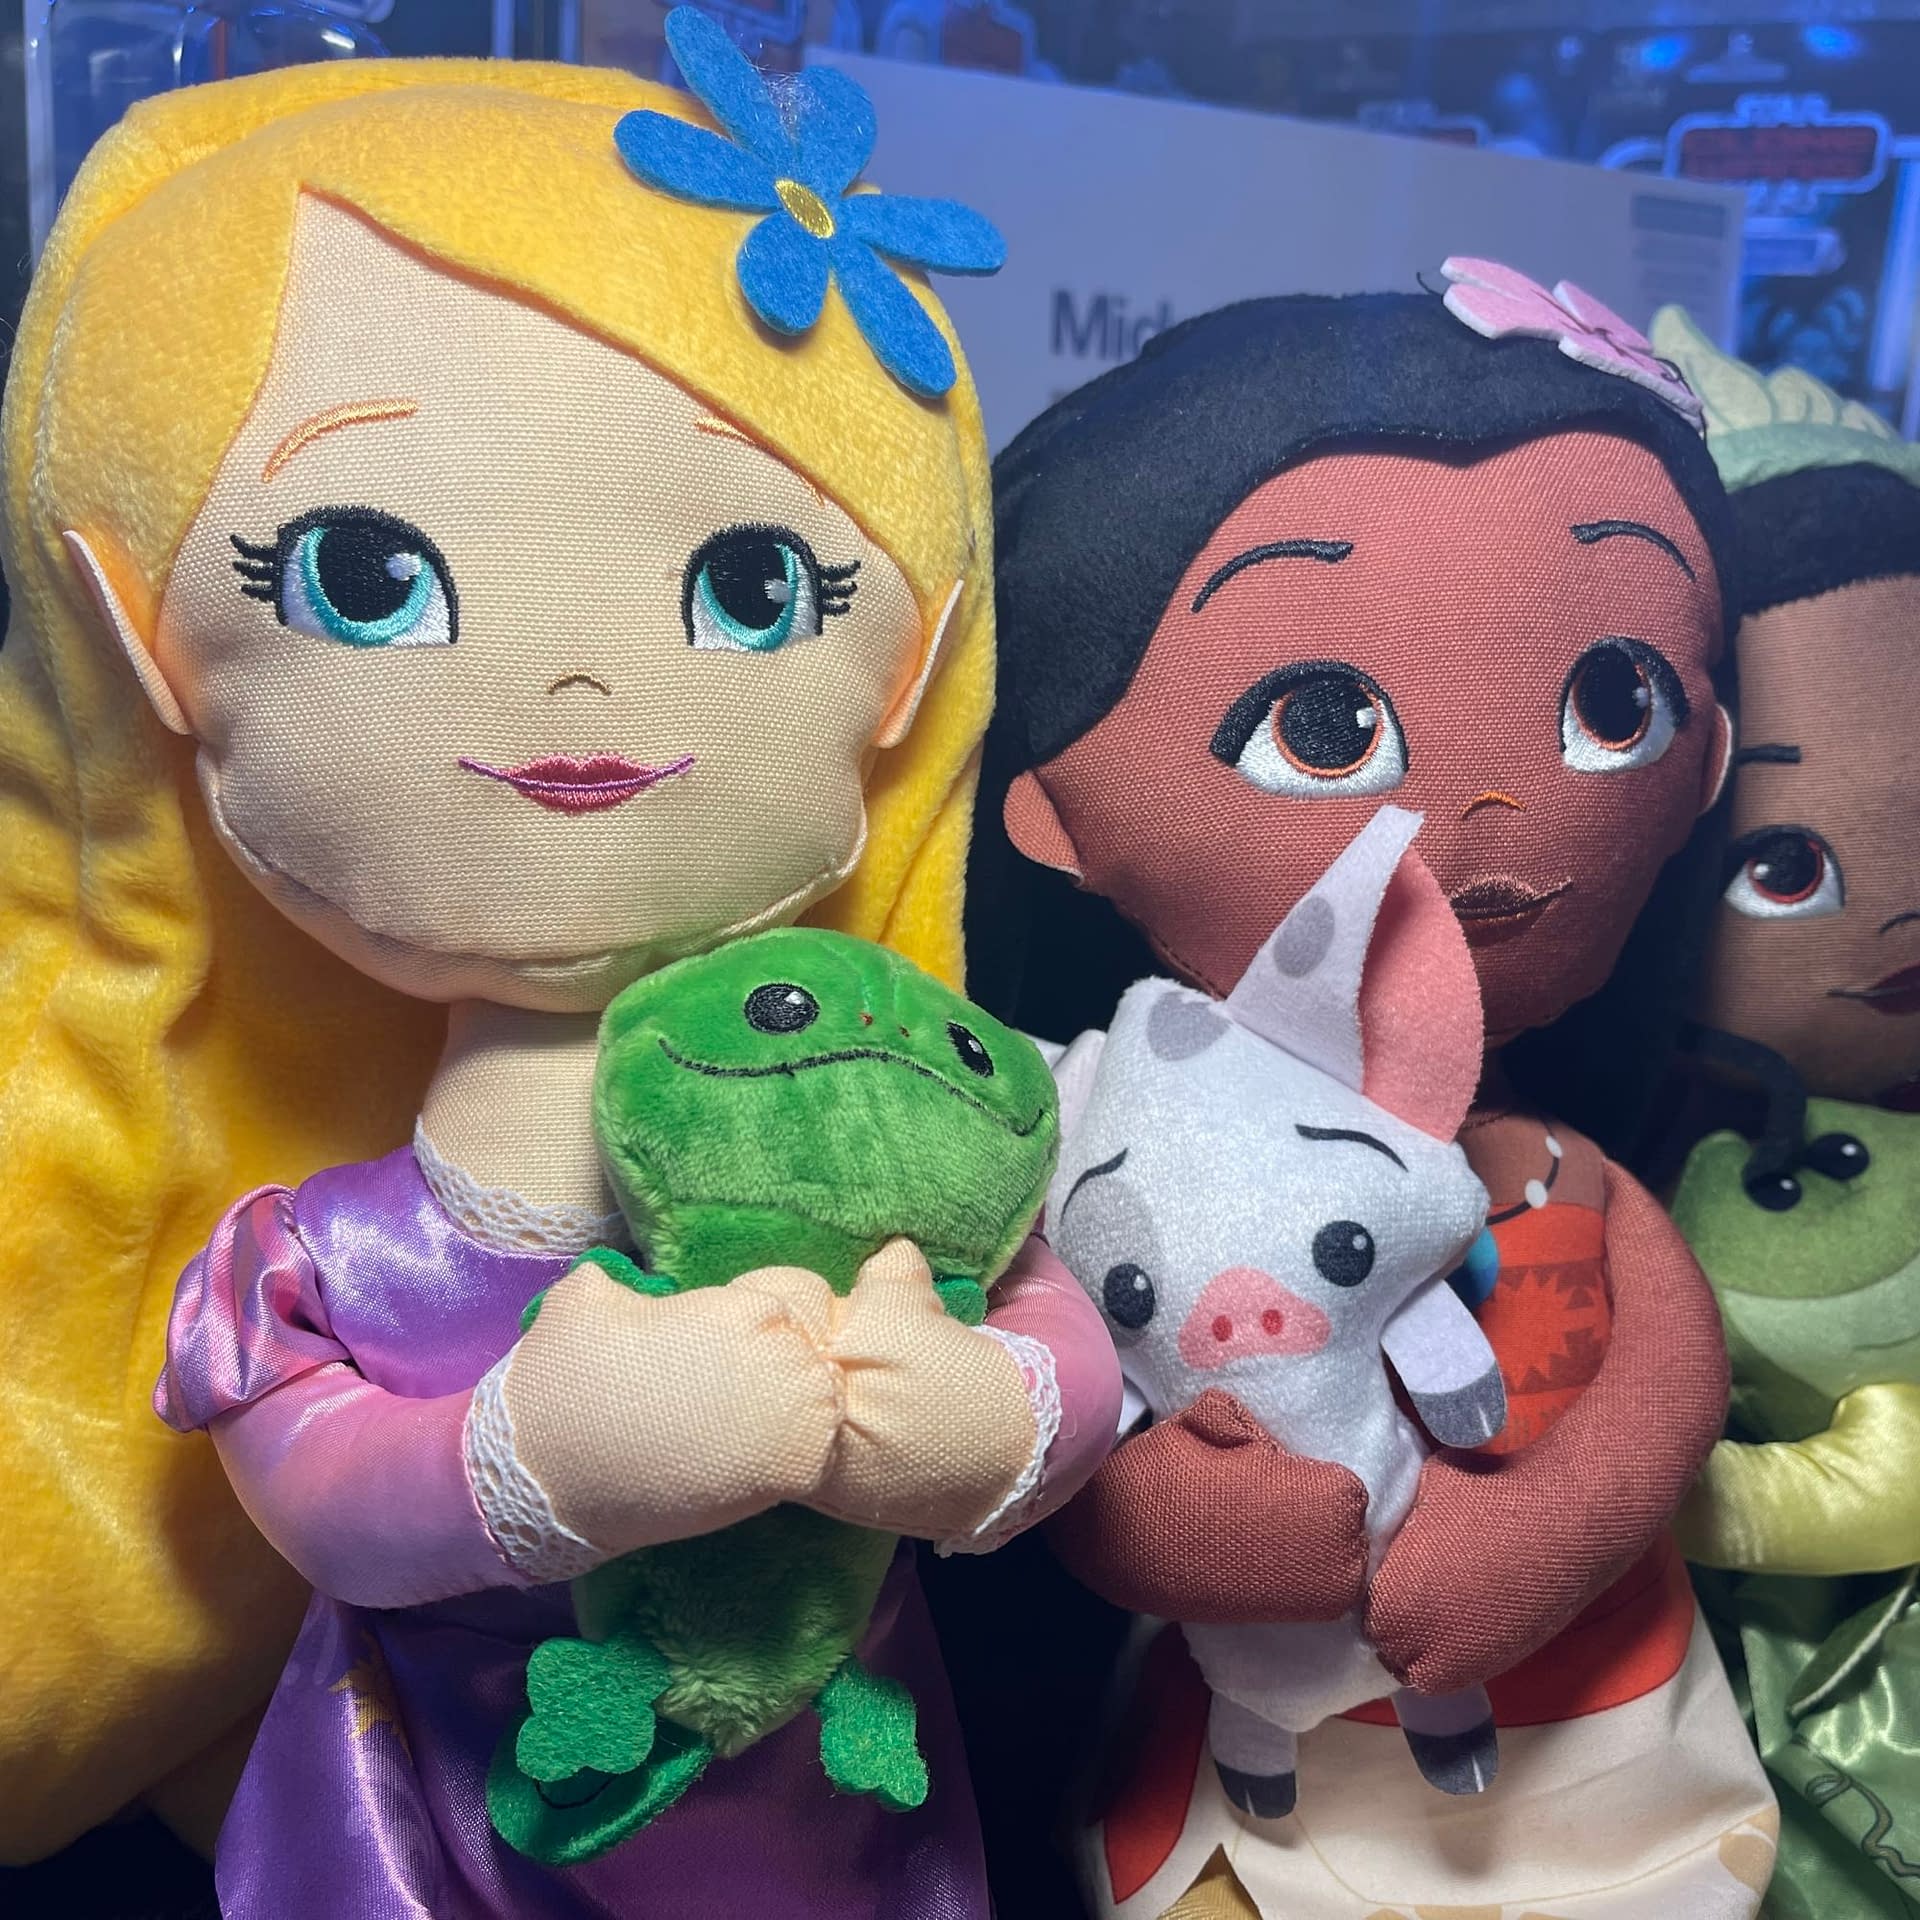 The Best Disney Princess Gifts to Give Your Princess For Christmas